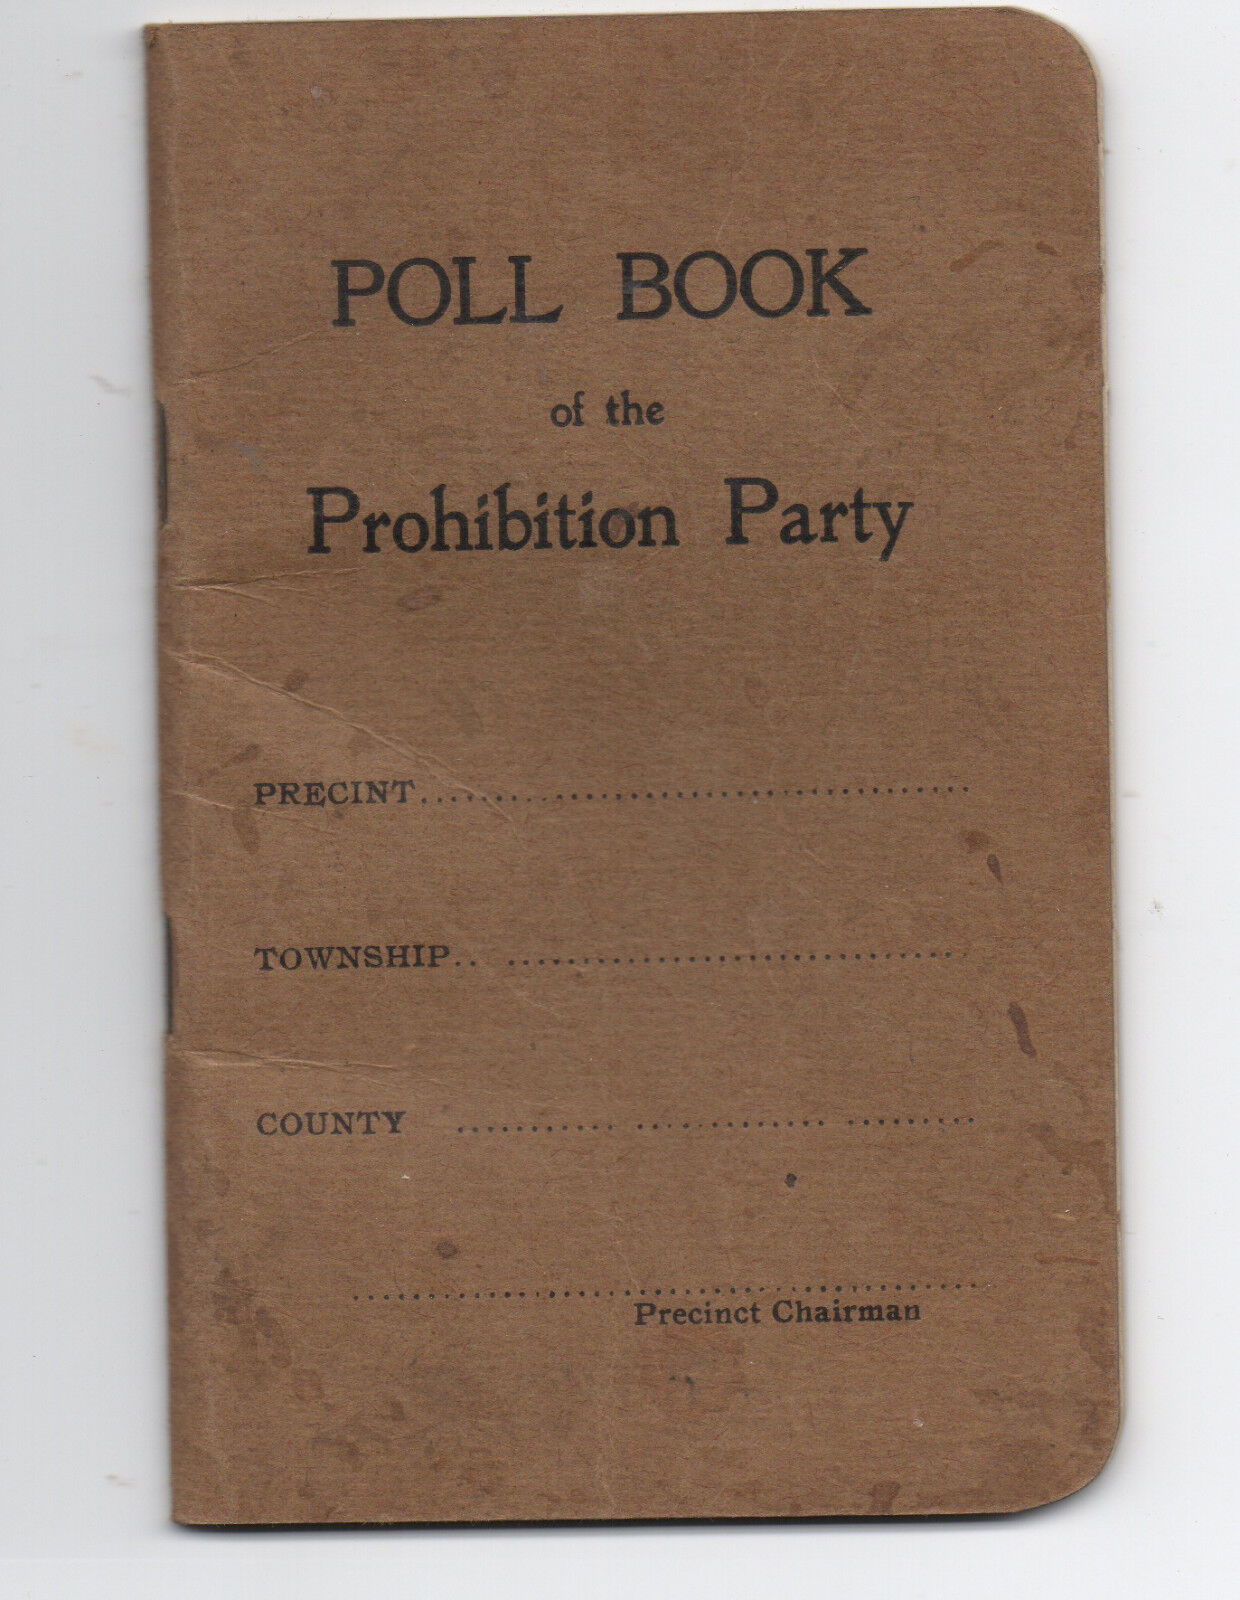 1910 Poll Book of the Prohibition Party with Names